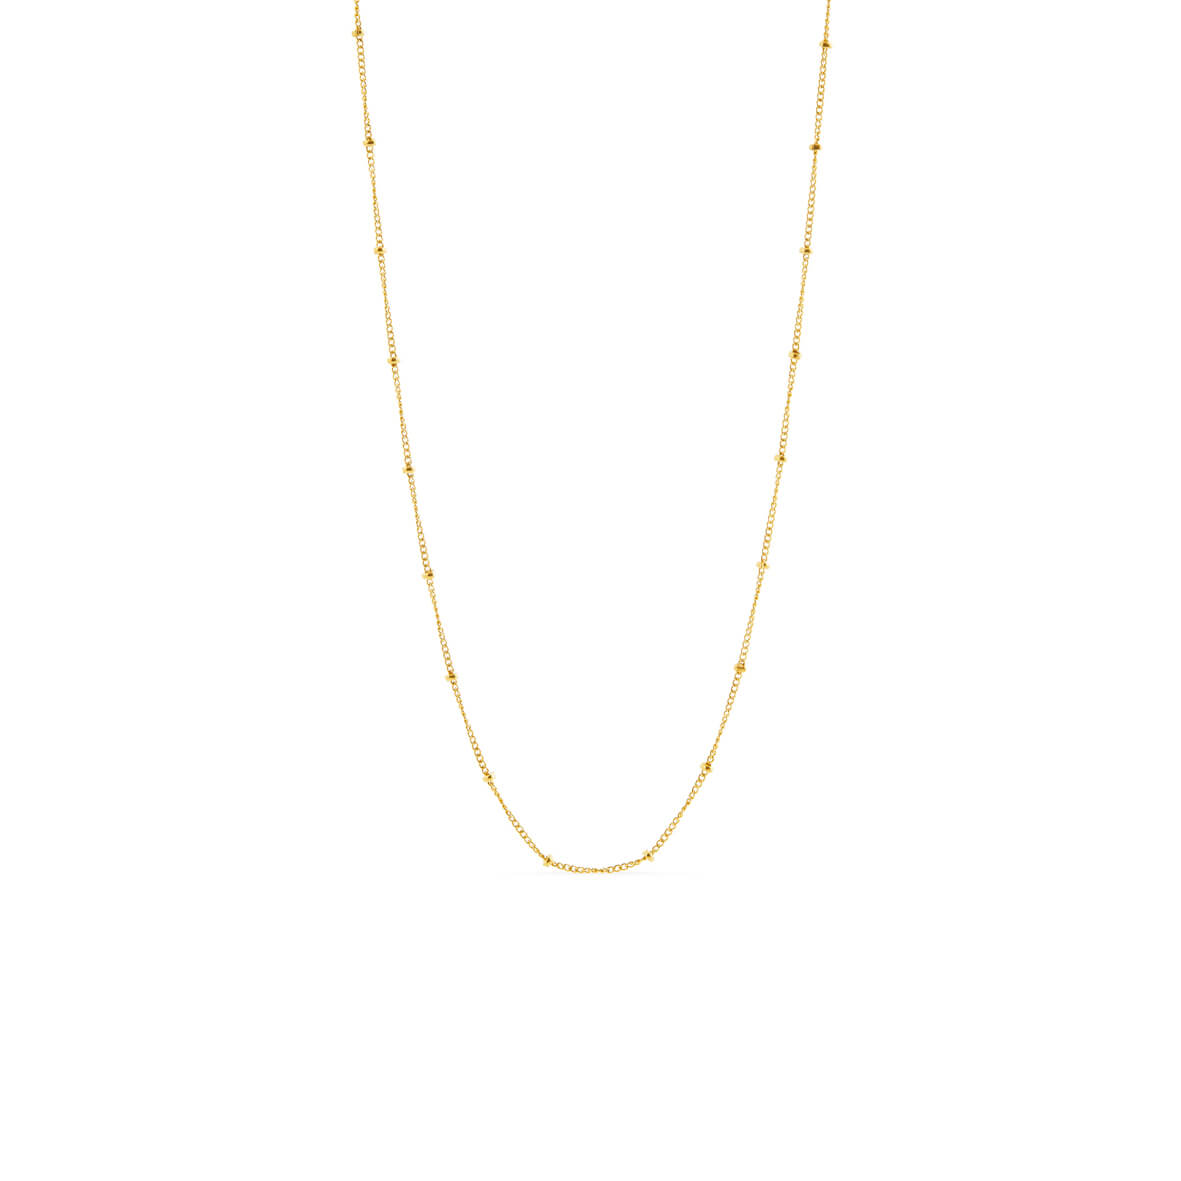 45 cm simple chain in gold plated silver / 1831-2-45